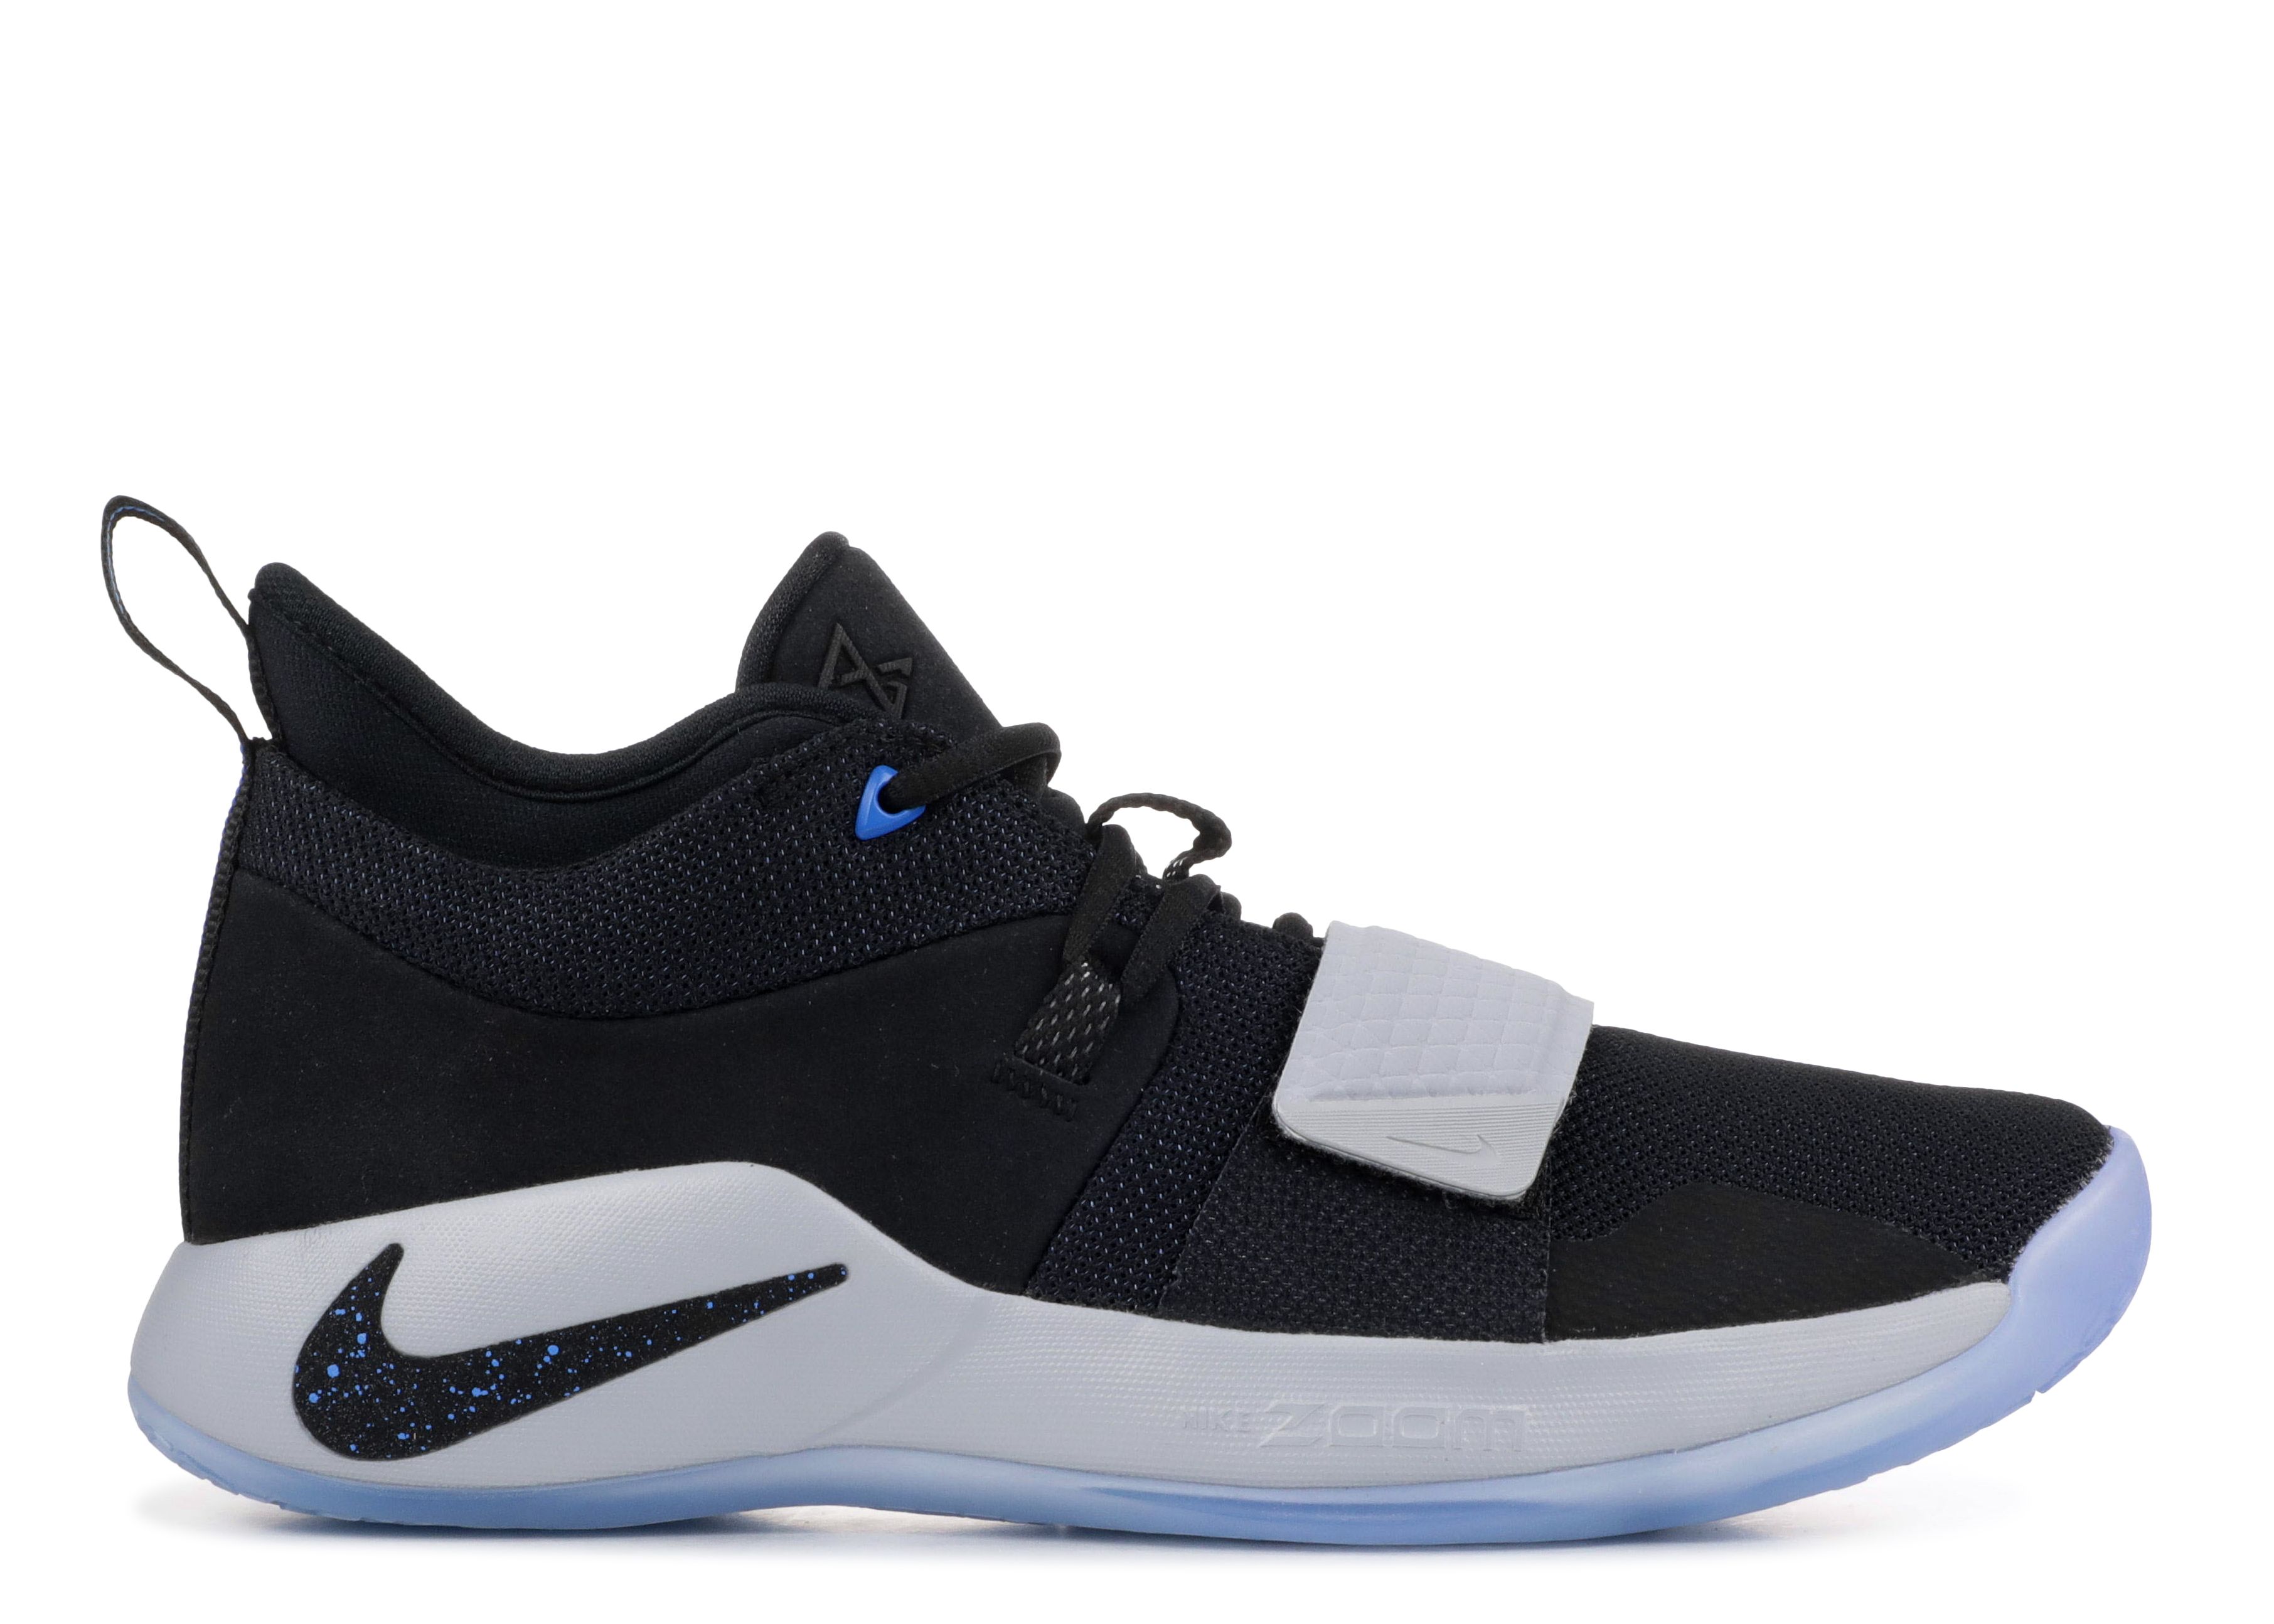 pg 2.5 blue and black